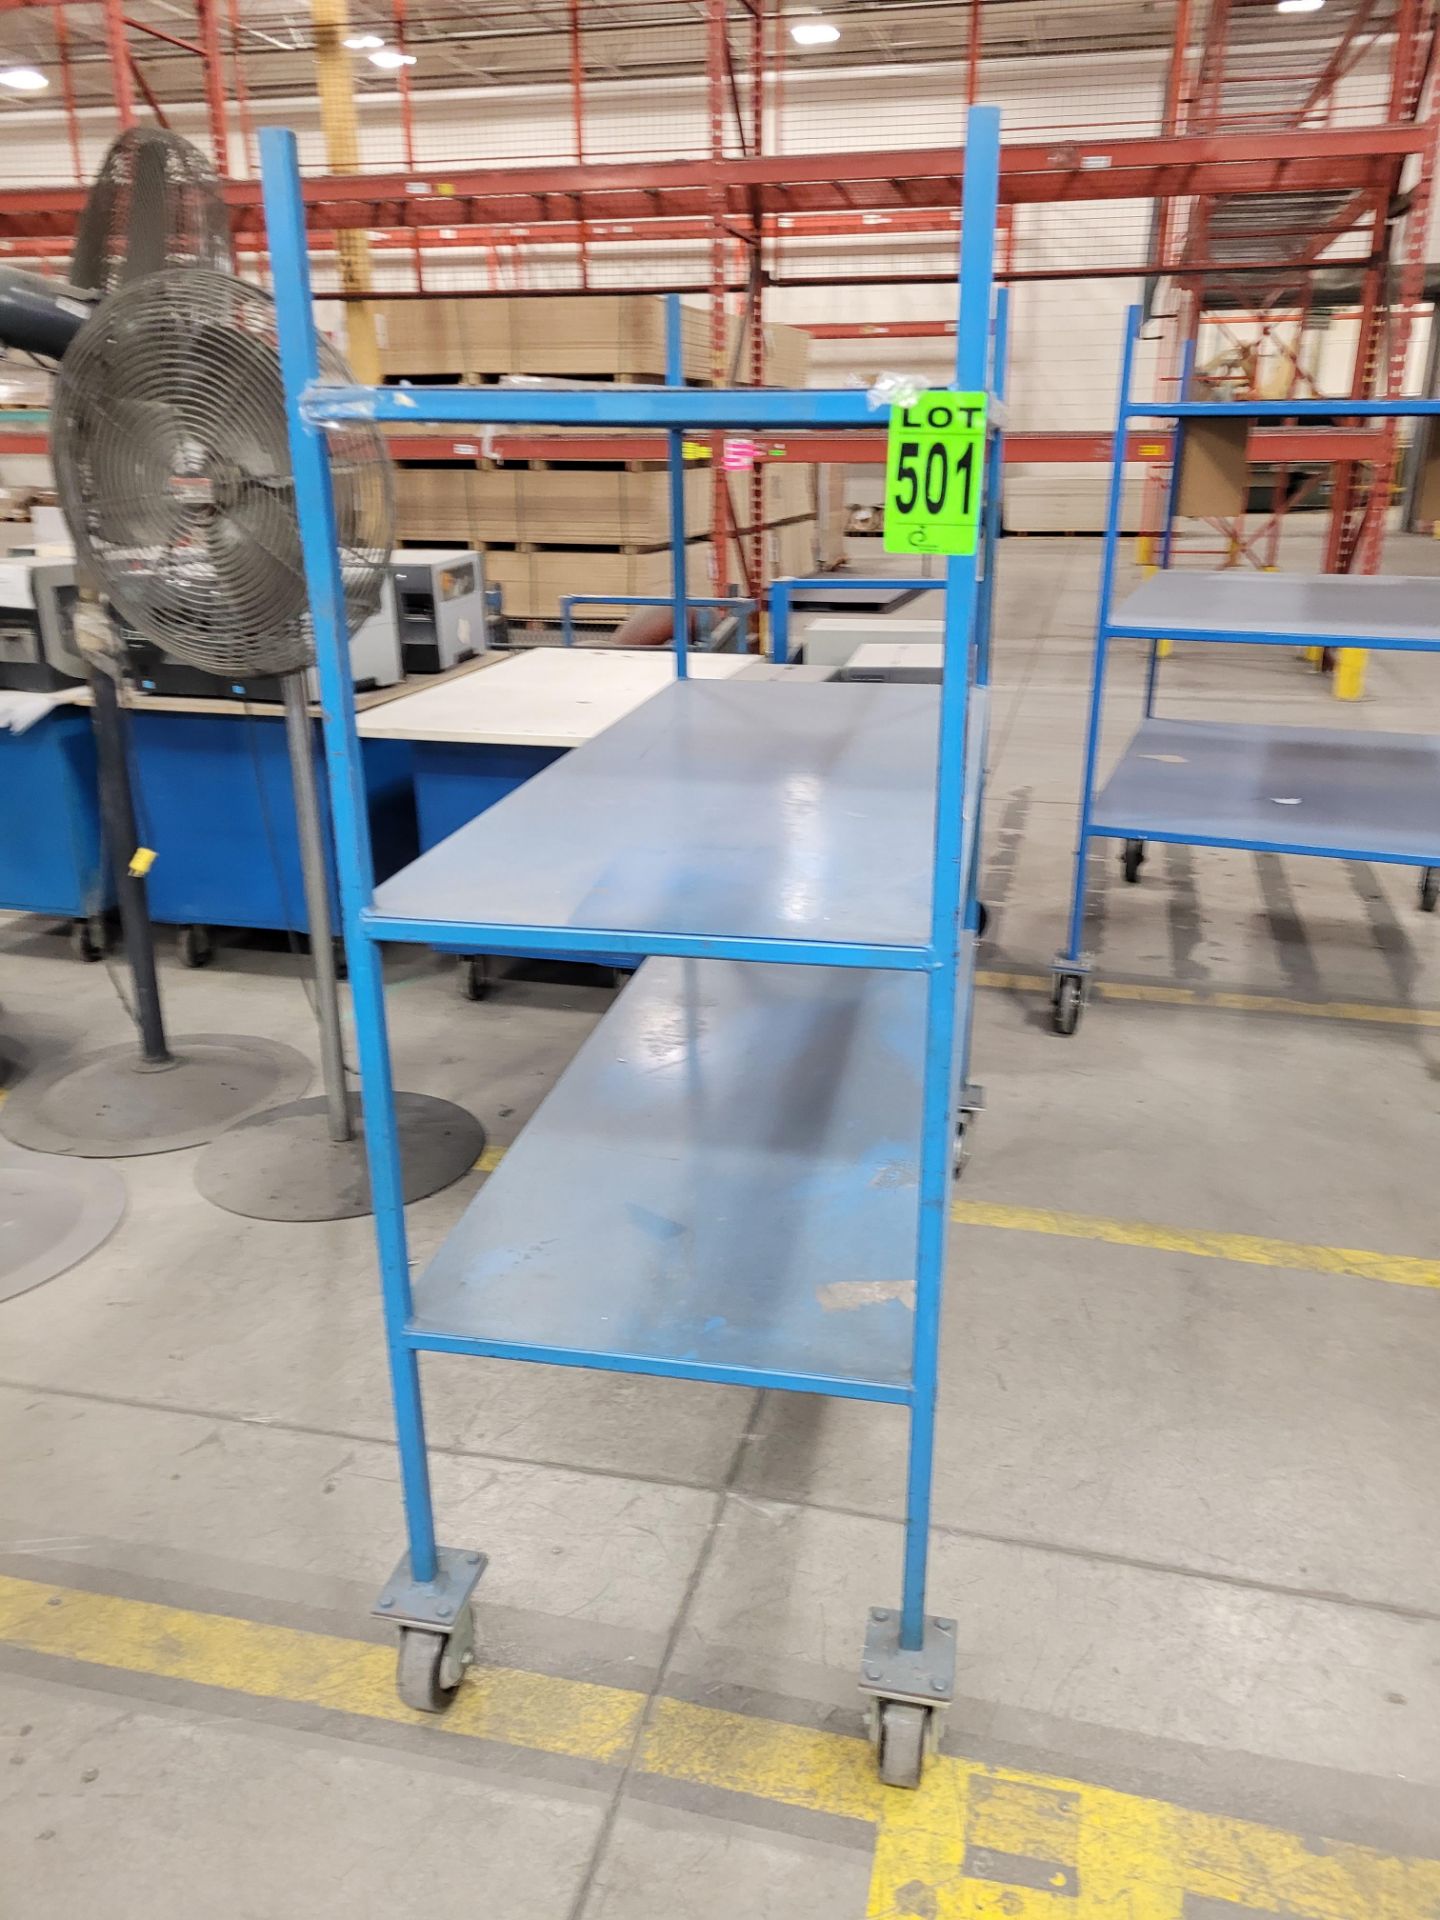 3-level mobile steel shelving unit on casters, 2' x 5' x 5' w/handles - Image 2 of 3